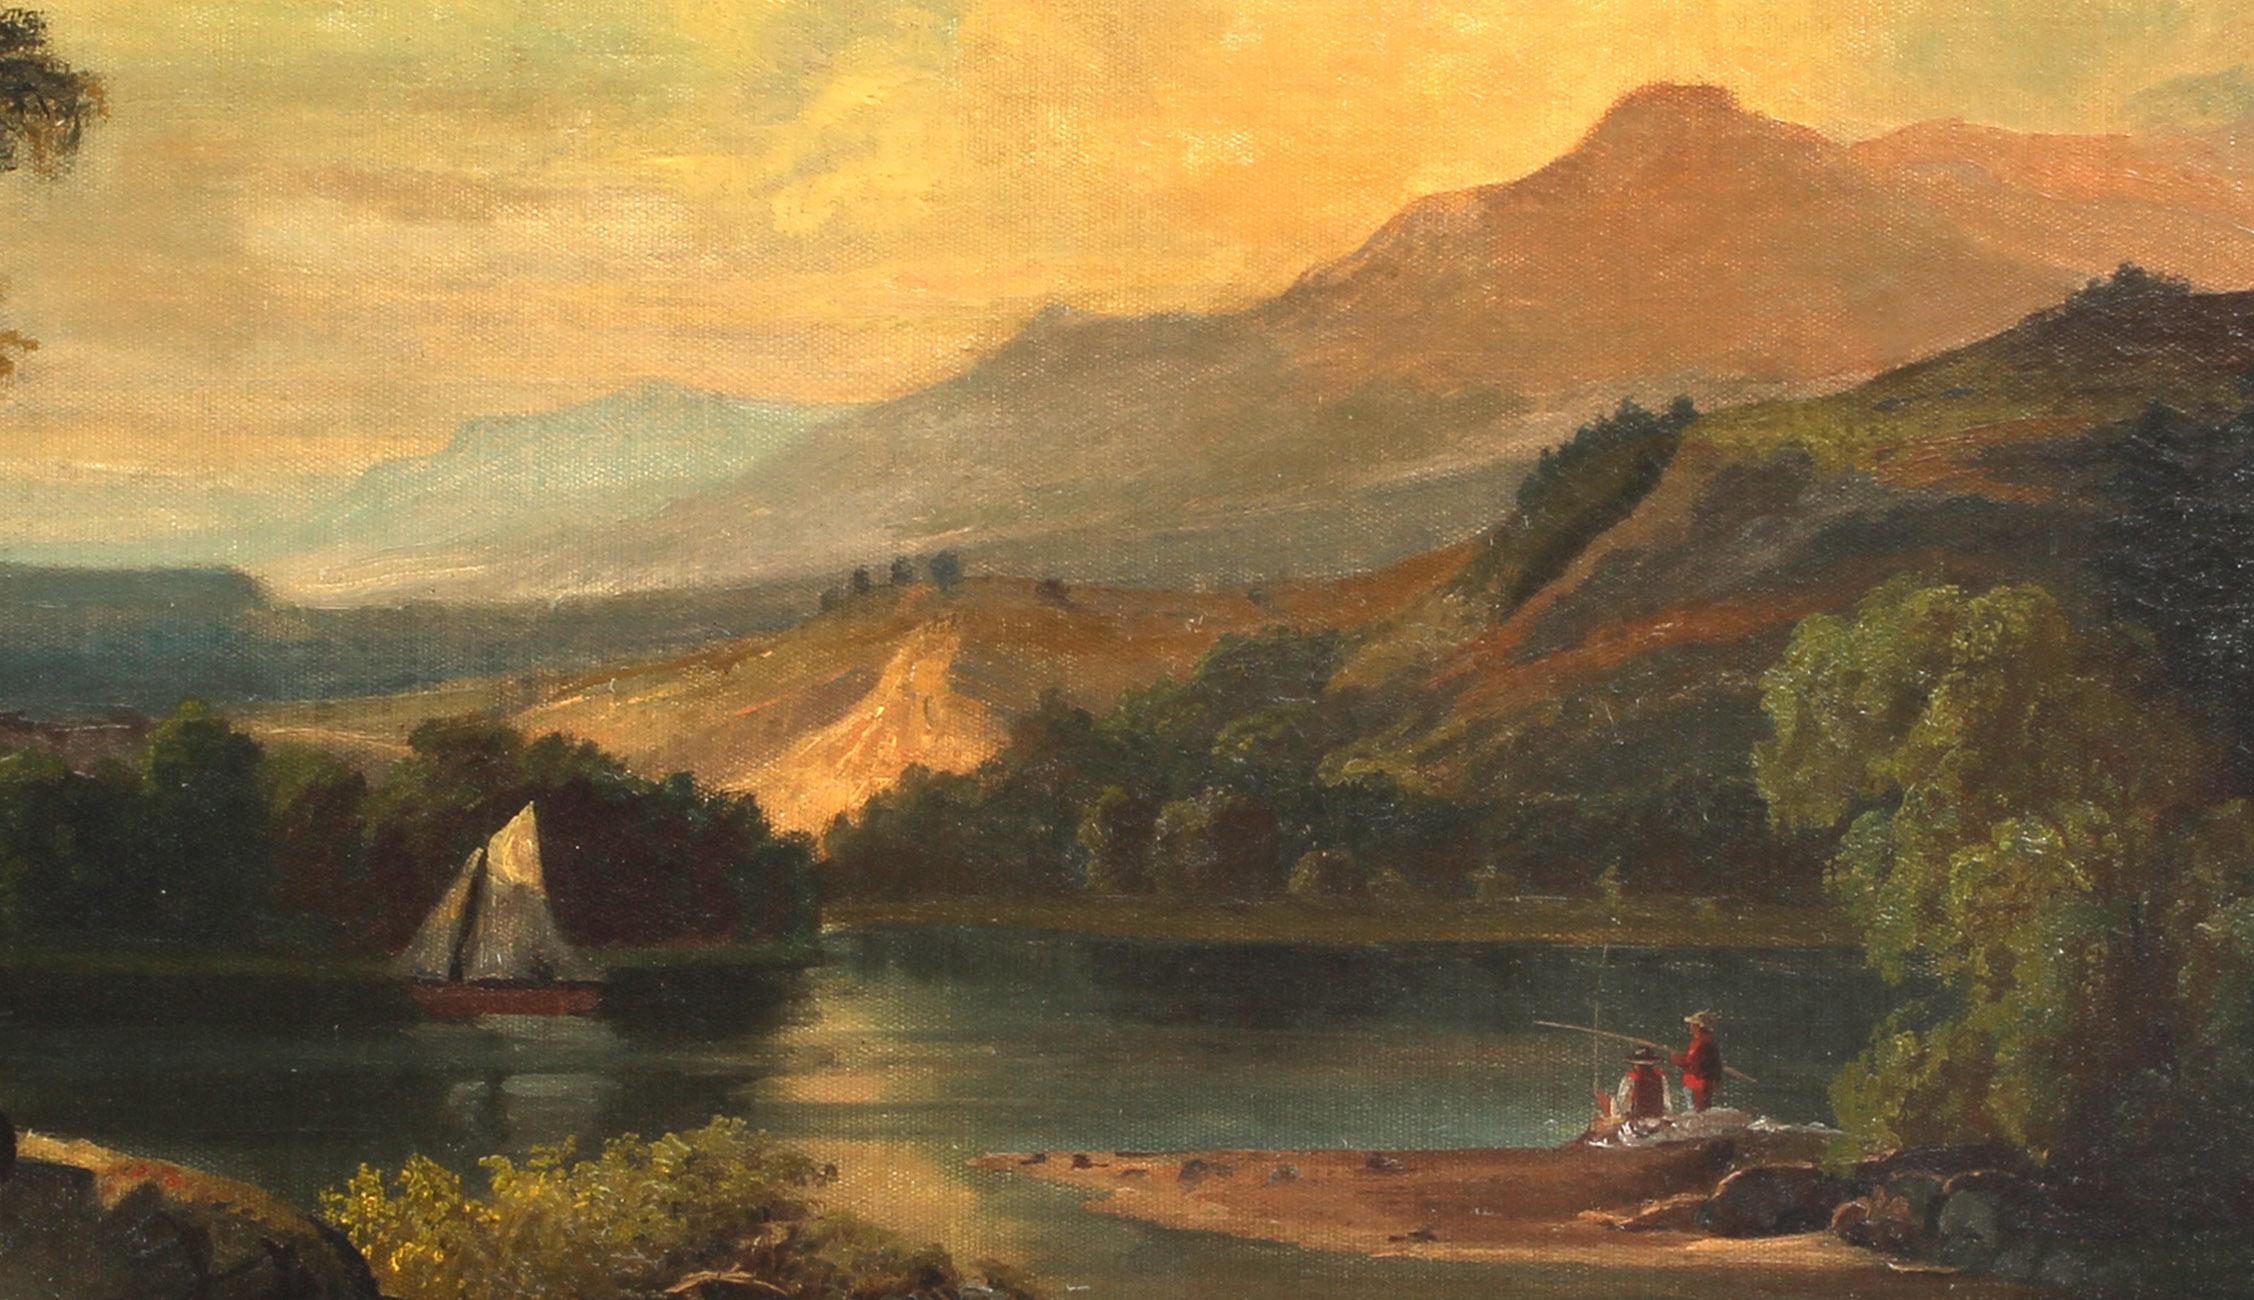 An expansive 19th Century Hudson River School panoramic landscape with figures fishing by the bank.

This gorgeous painting comes housed in a period frame which enhances the presentation on the wall.

Bearing similarities to the works of Benjaman